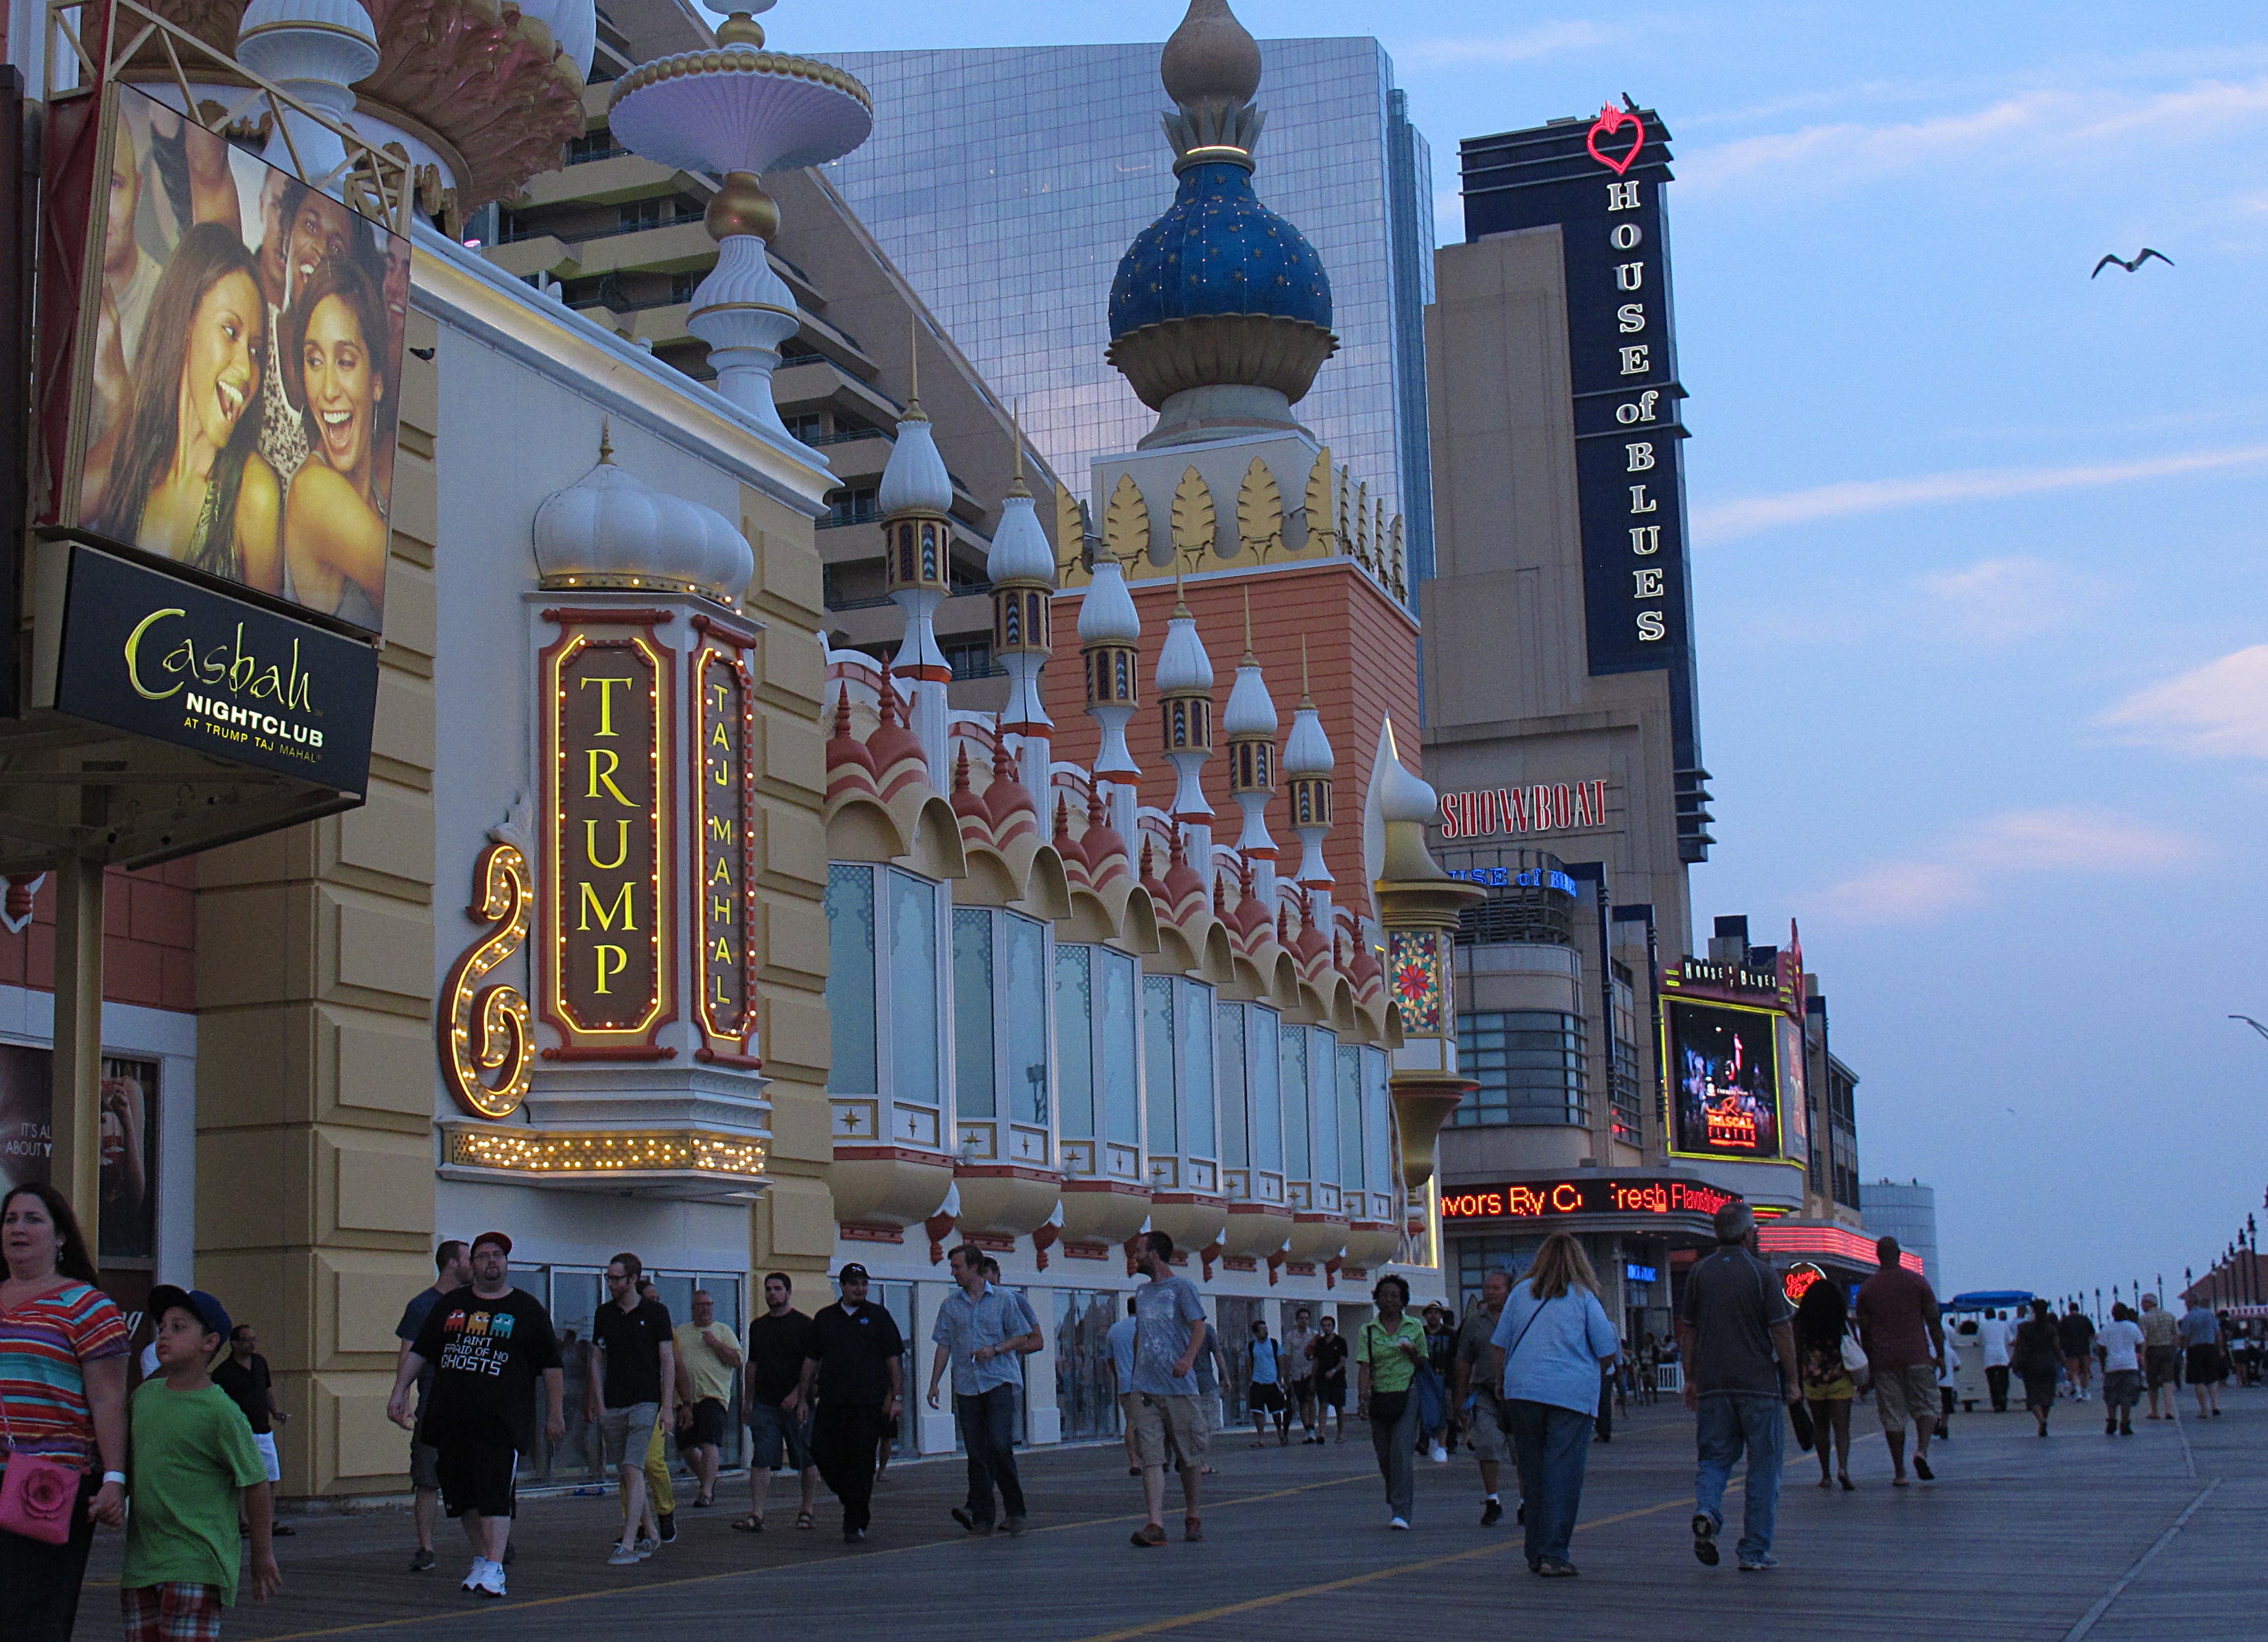  The casino boom transformed the Boardwalk, but Atlantic City remains poor and struggling. (AP Photo/Wayne Parry) 